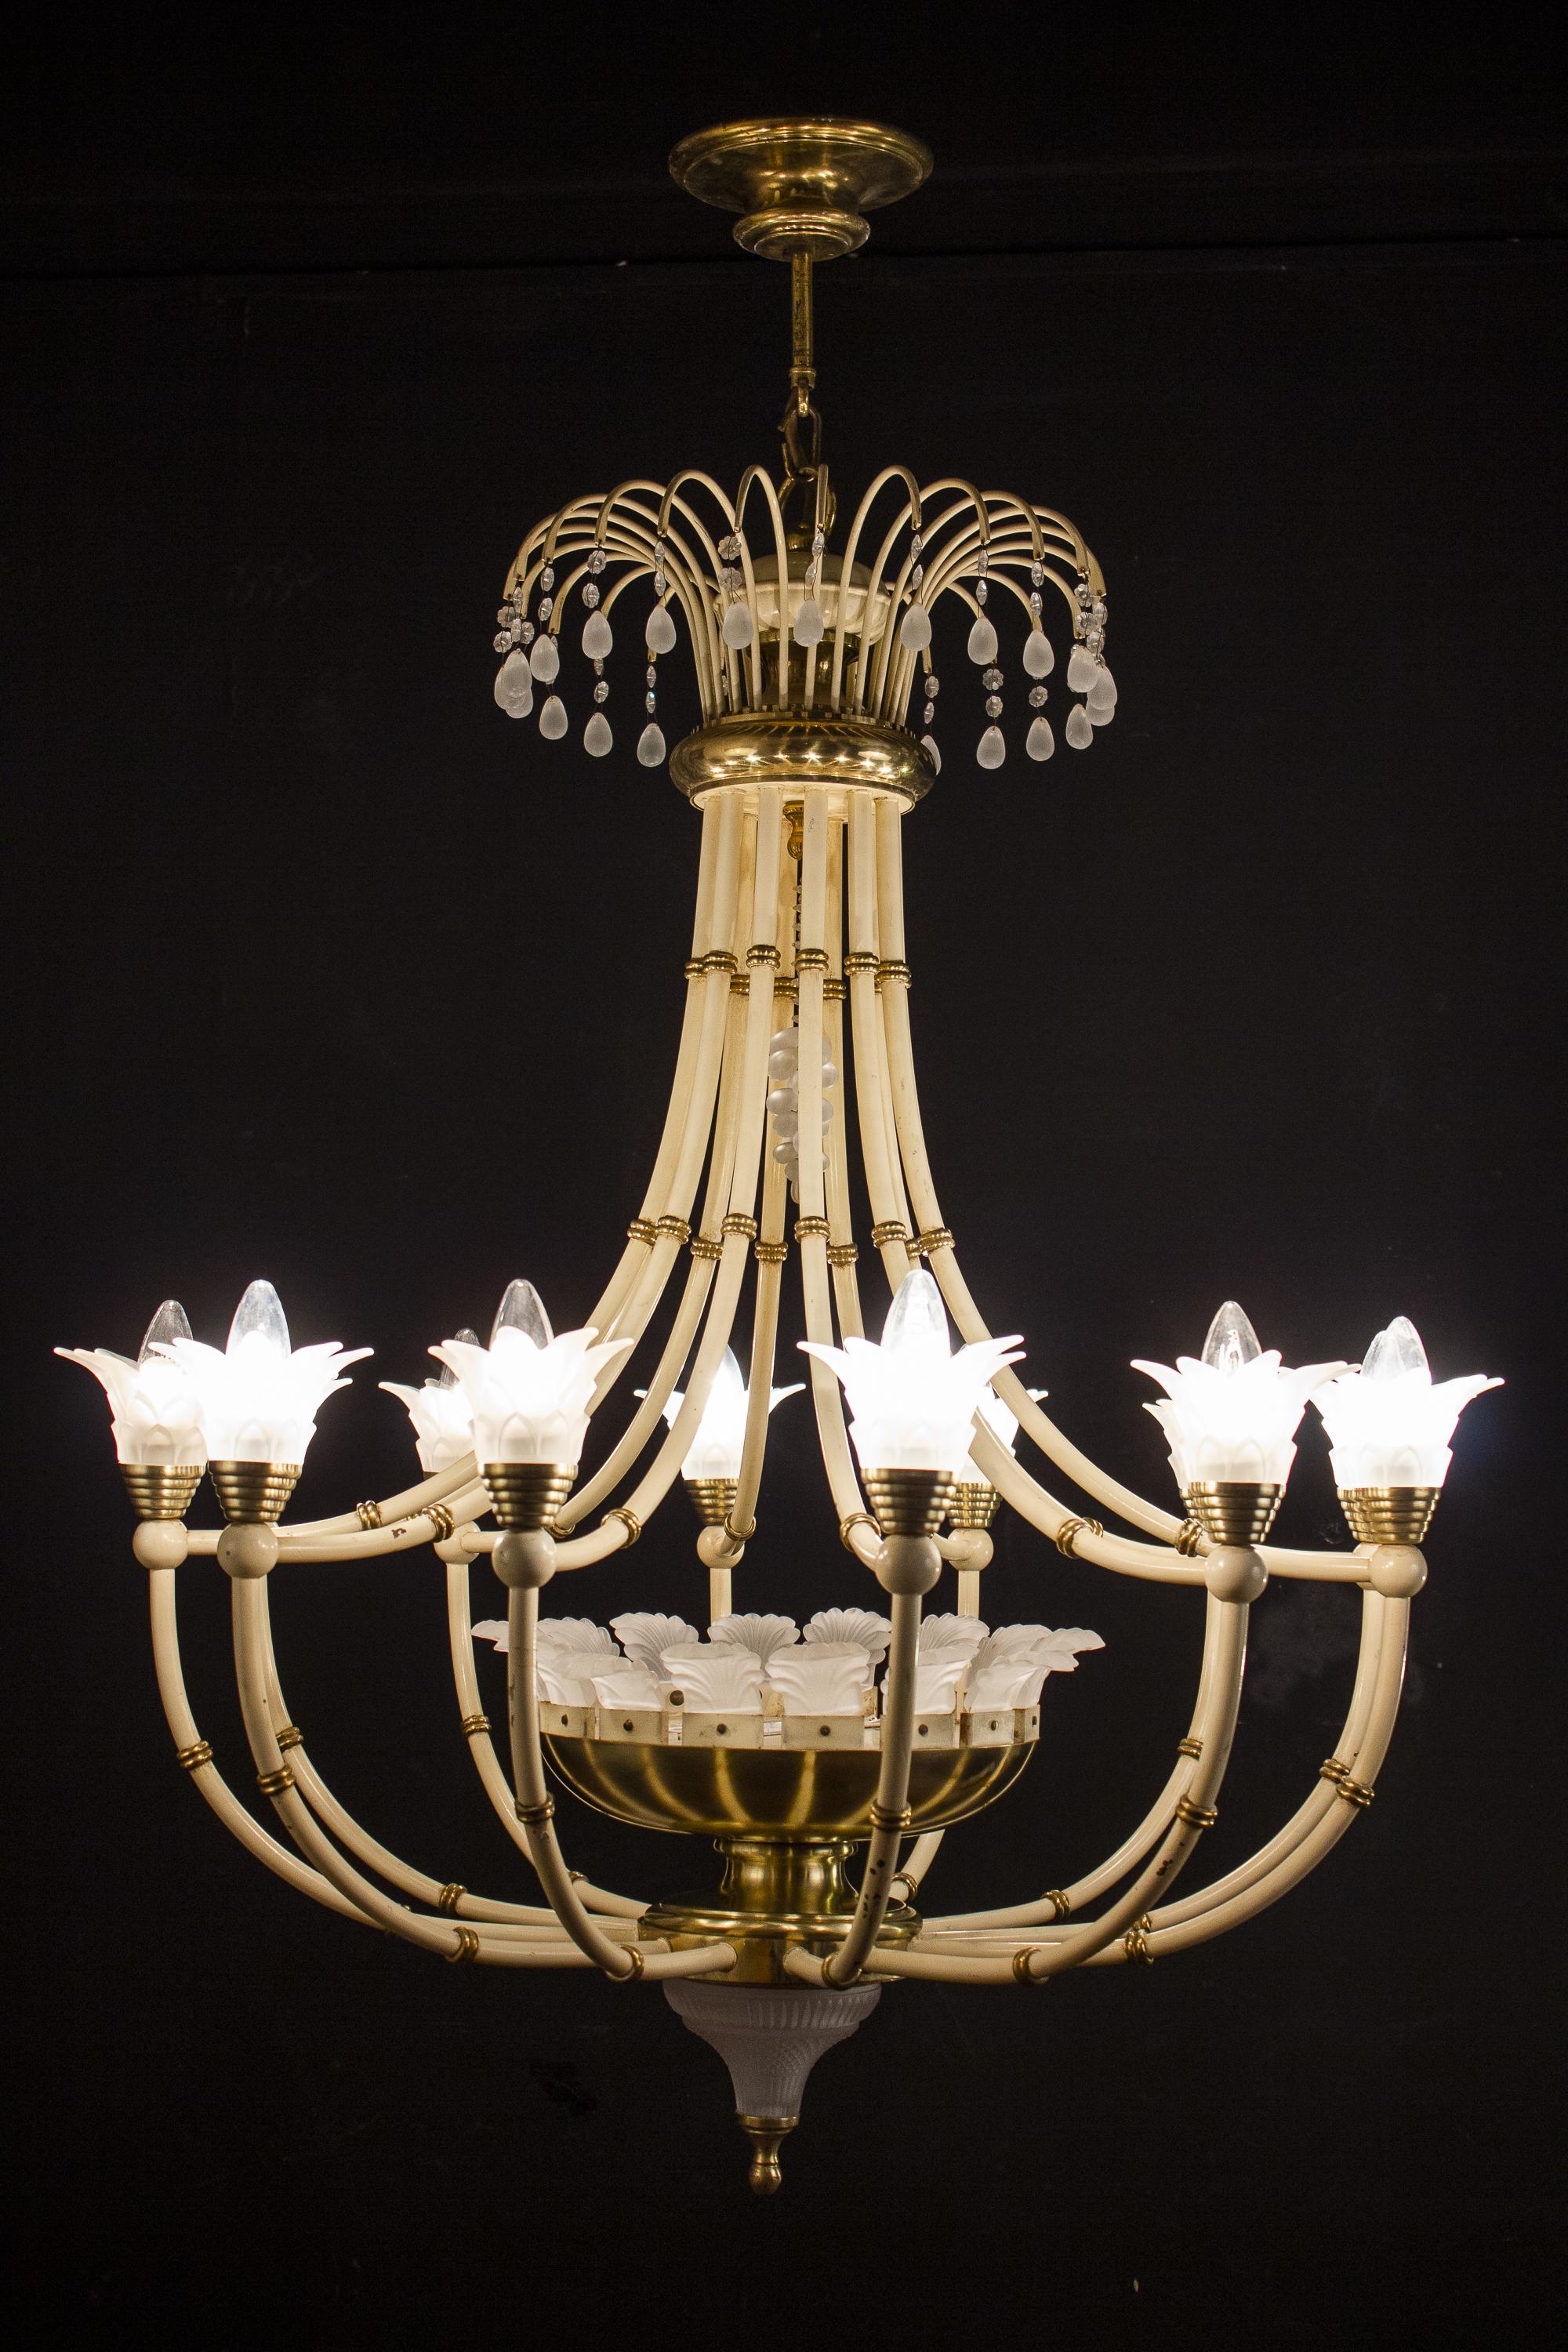 Fabulous pair of vintage Italian 12-light chandelier by Banci, manufactured by Banci Firenze in 1970s
ivory painted iron structure with brass details decorated with 12 arms ending with flower shaped frosted glass shades.
Perfect vintage condition,